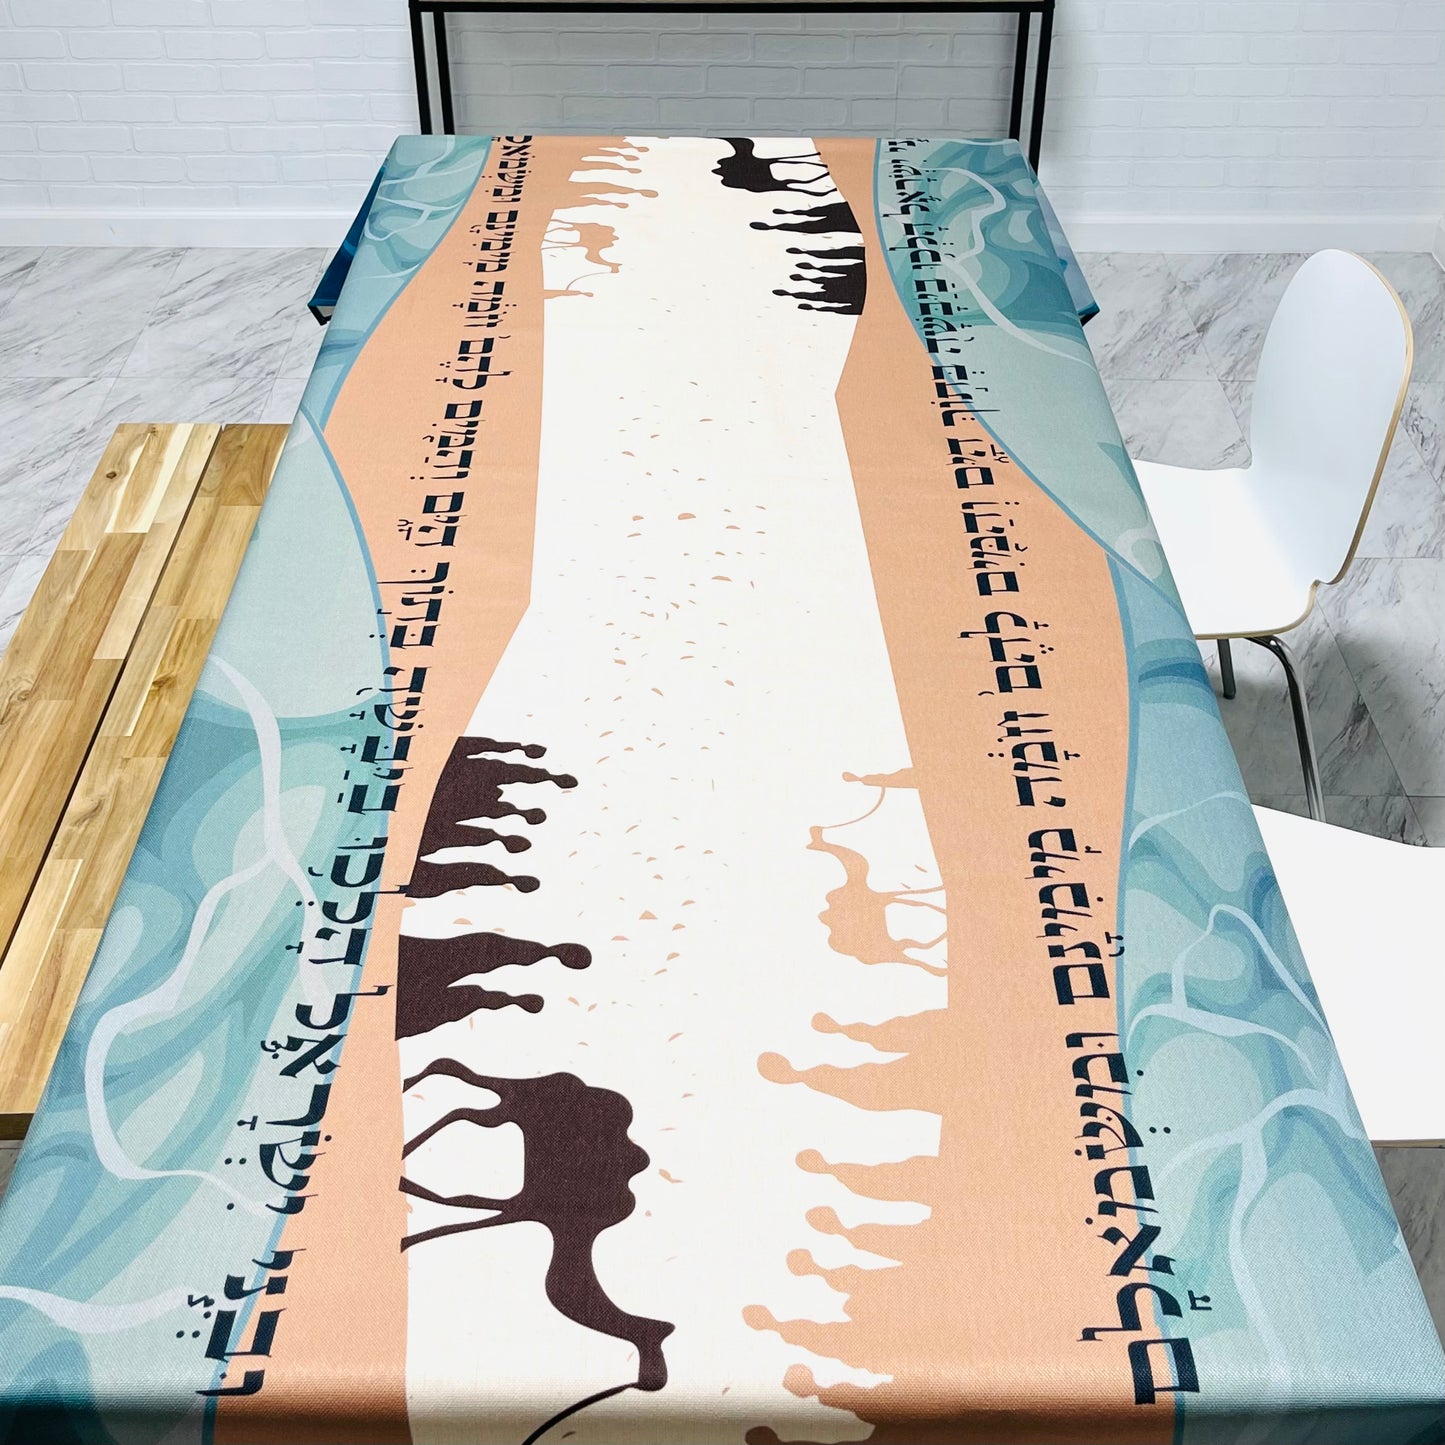 Split the Sea Passover (Pesach) Tablecloth get a FREE Matching Matzah Cover⁩